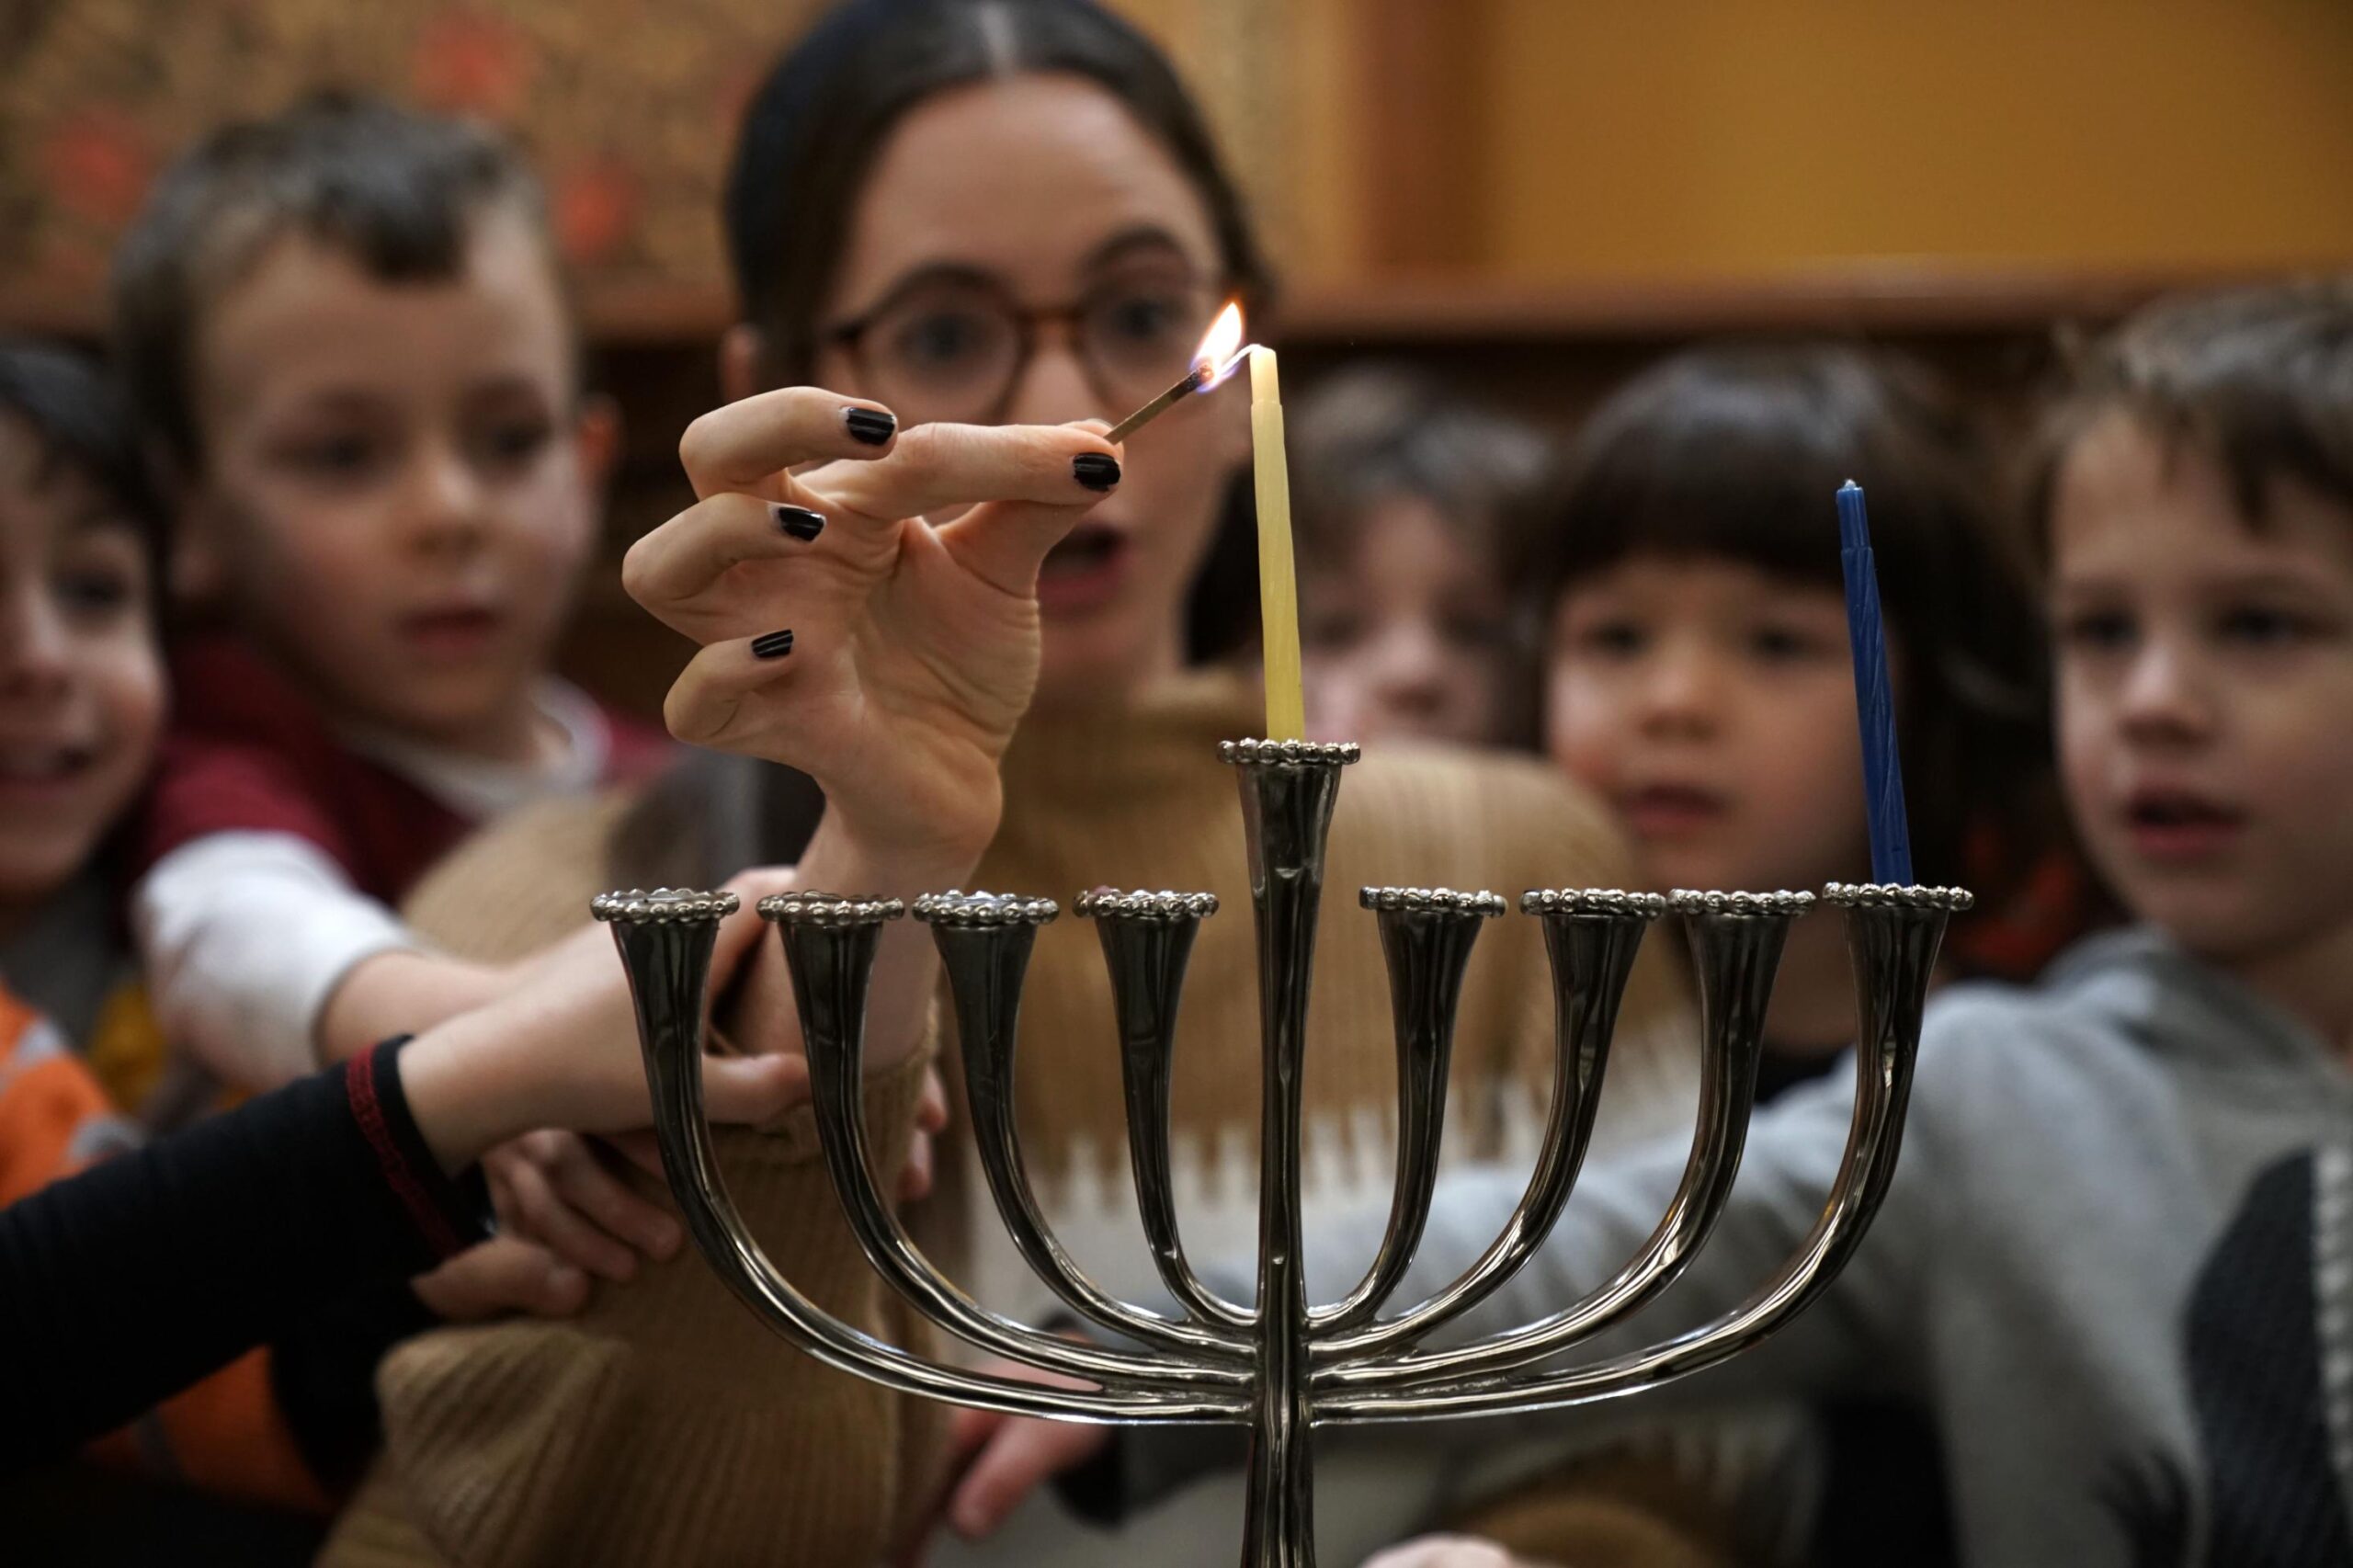 Hanukkah – 28th of November to the 6th of December